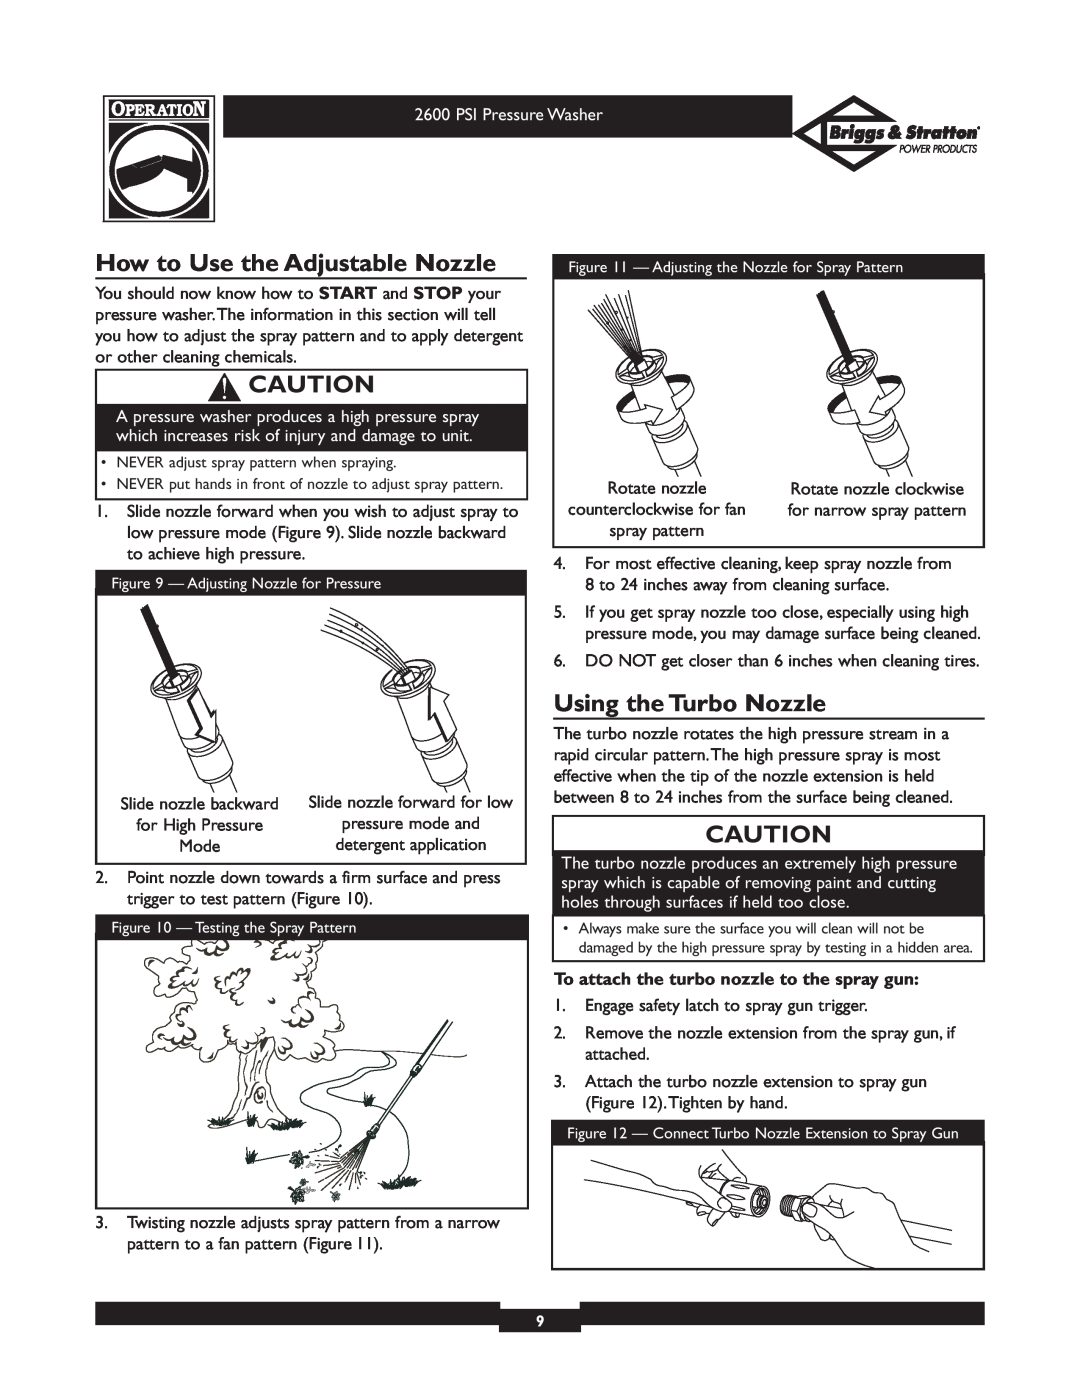 Briggs & Stratton 20216 owner manual How to Use the Adjustable Nozzle, Using the Turbo Nozzle, PSI Pressure Washer 